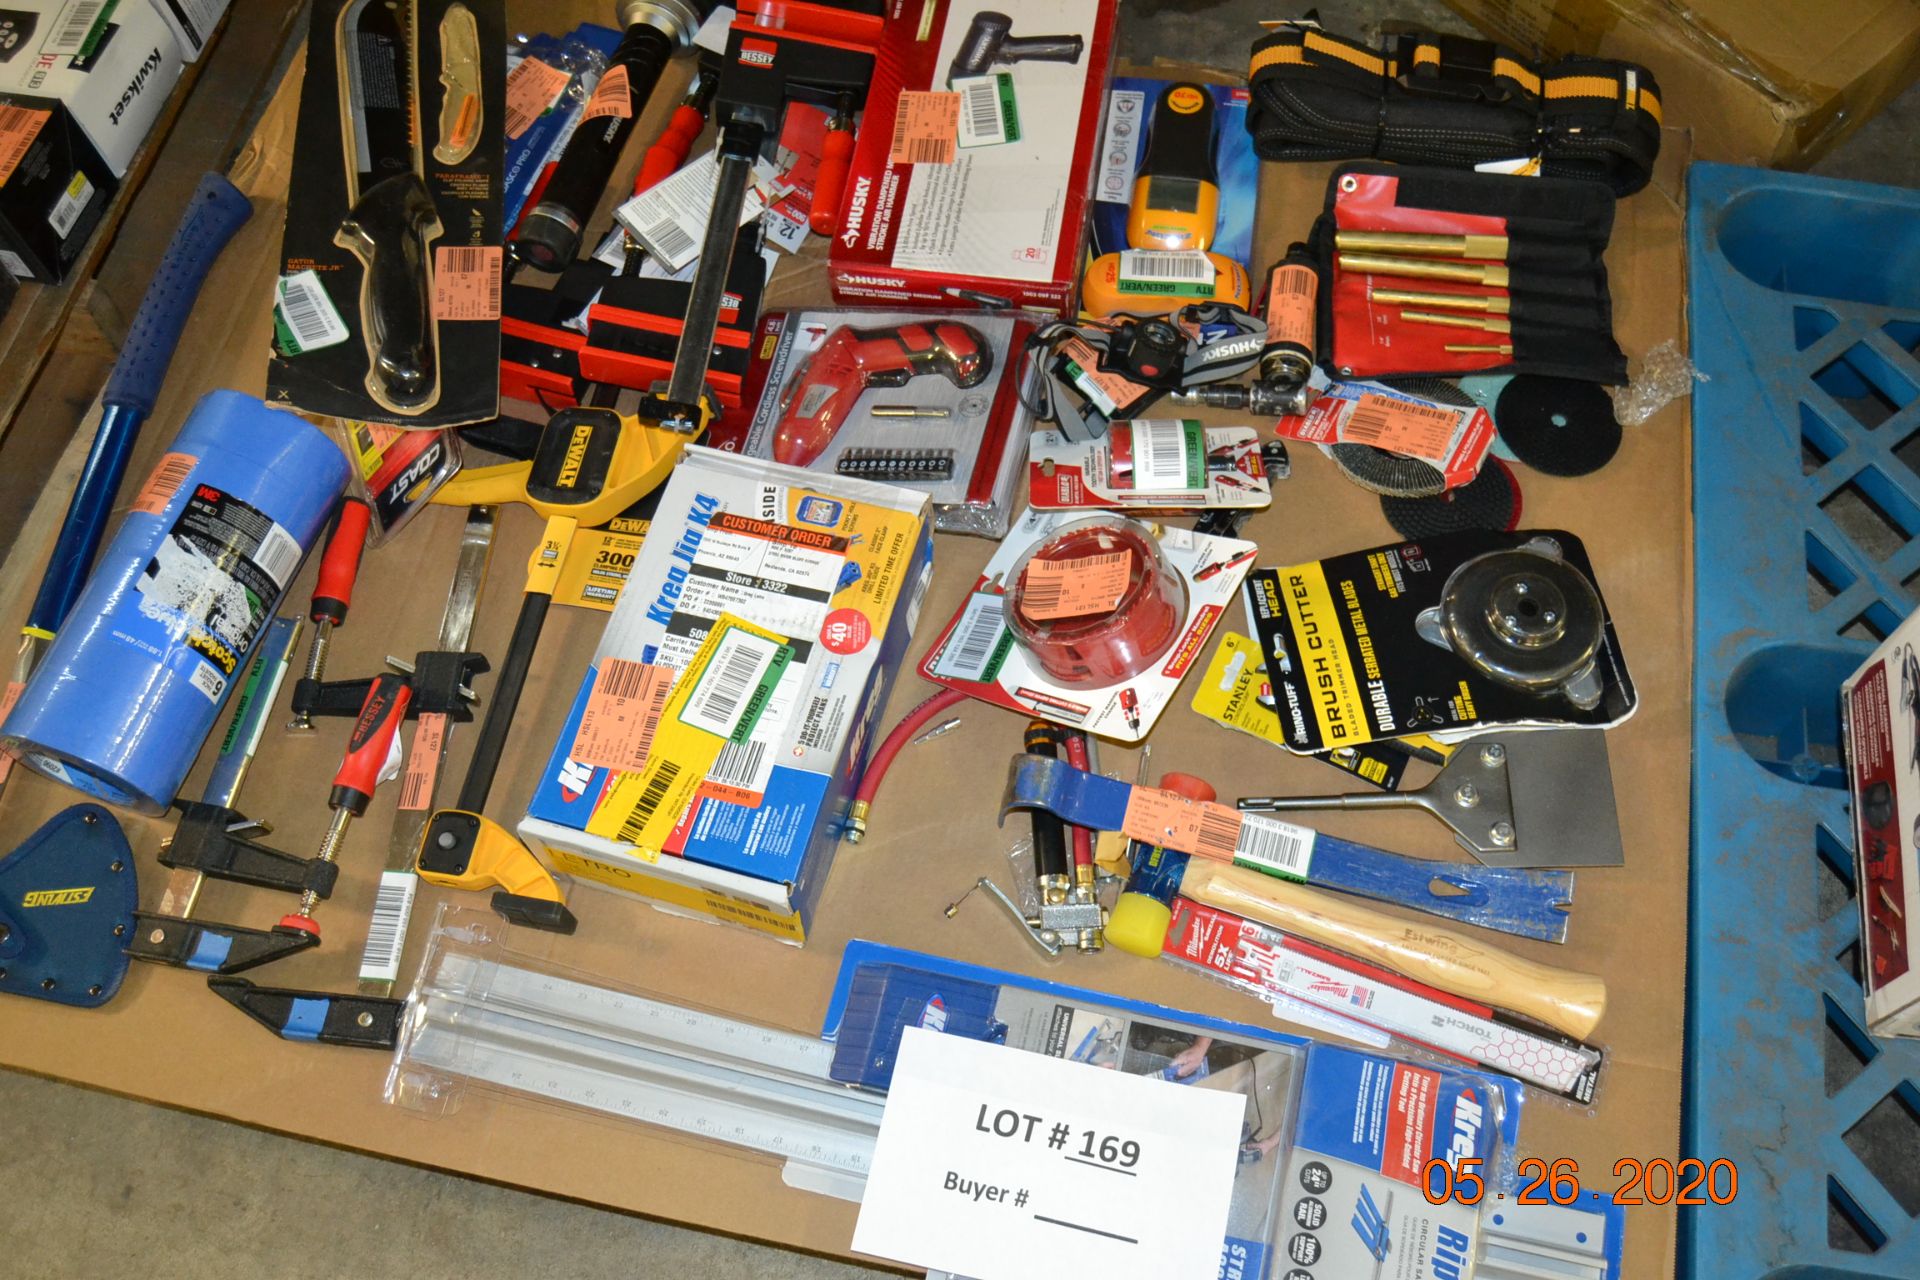 ASSORTE CLAMPS, PAINTERS TAPE, MACHETE, AIR HAMMER, AND MORE